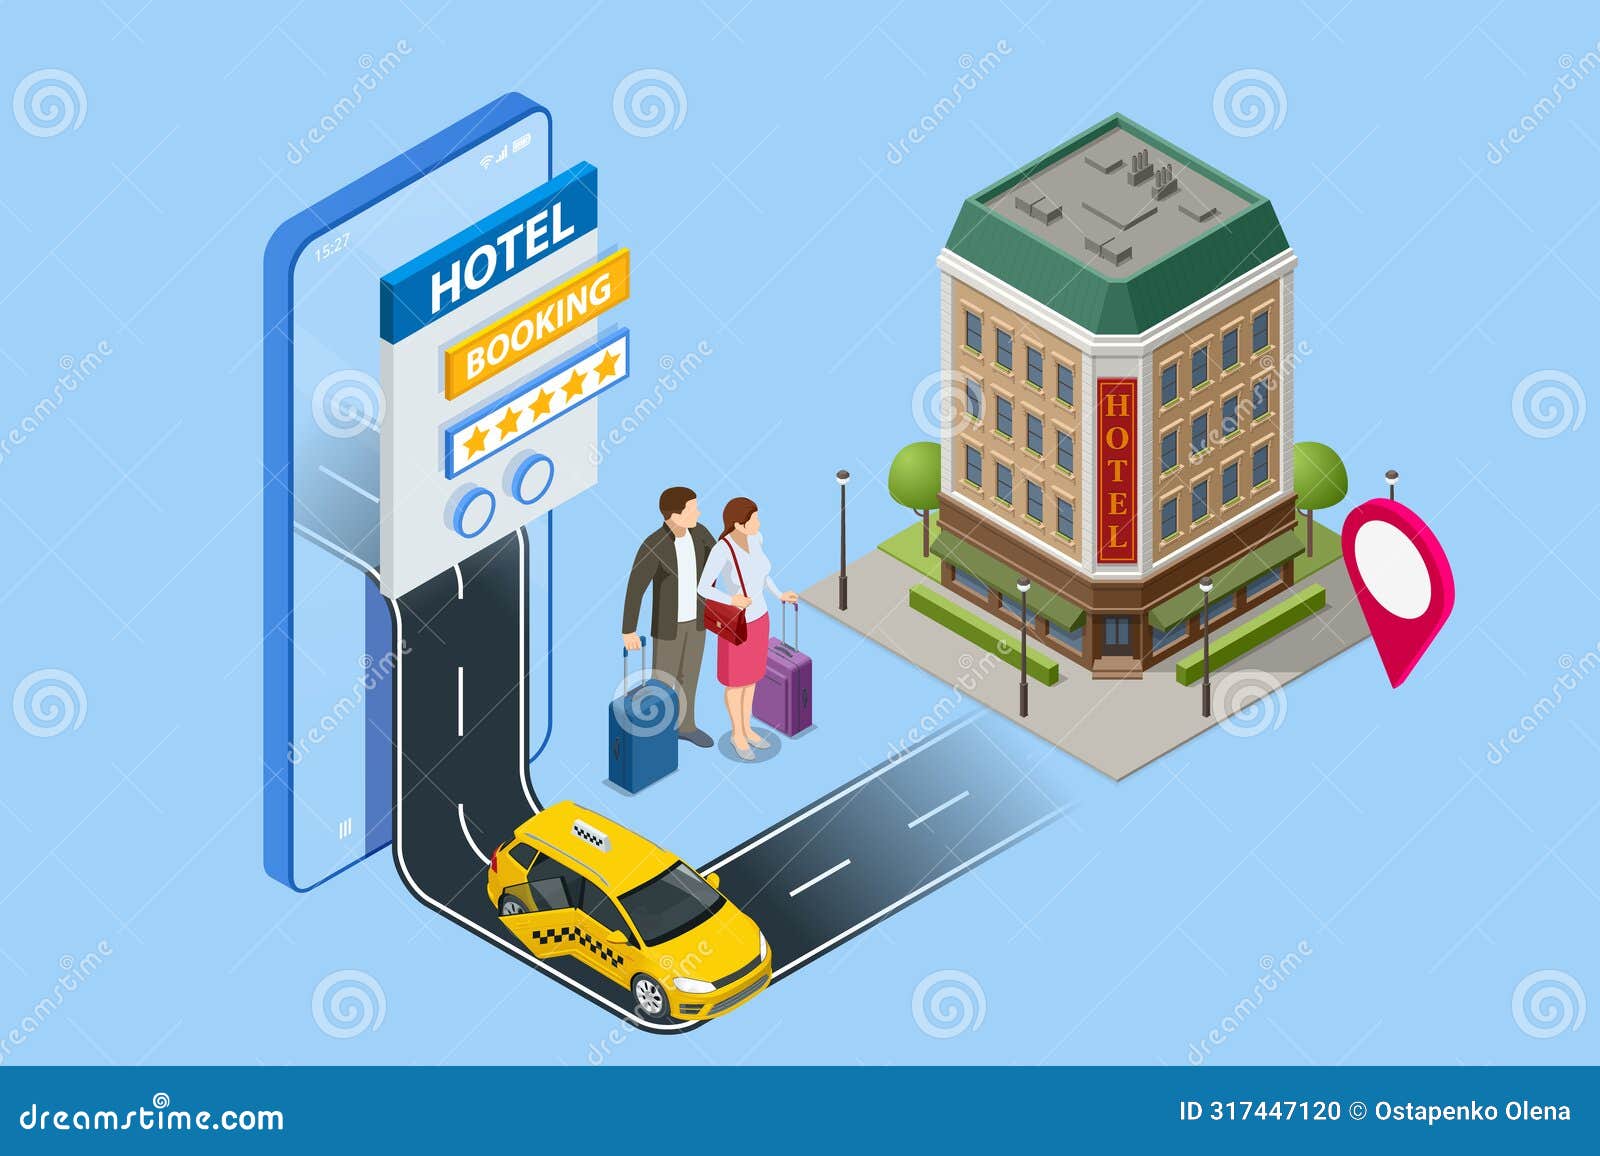 expensive hotel entrance. isometric online hotel booking concept. people booking hotel and search reservation for